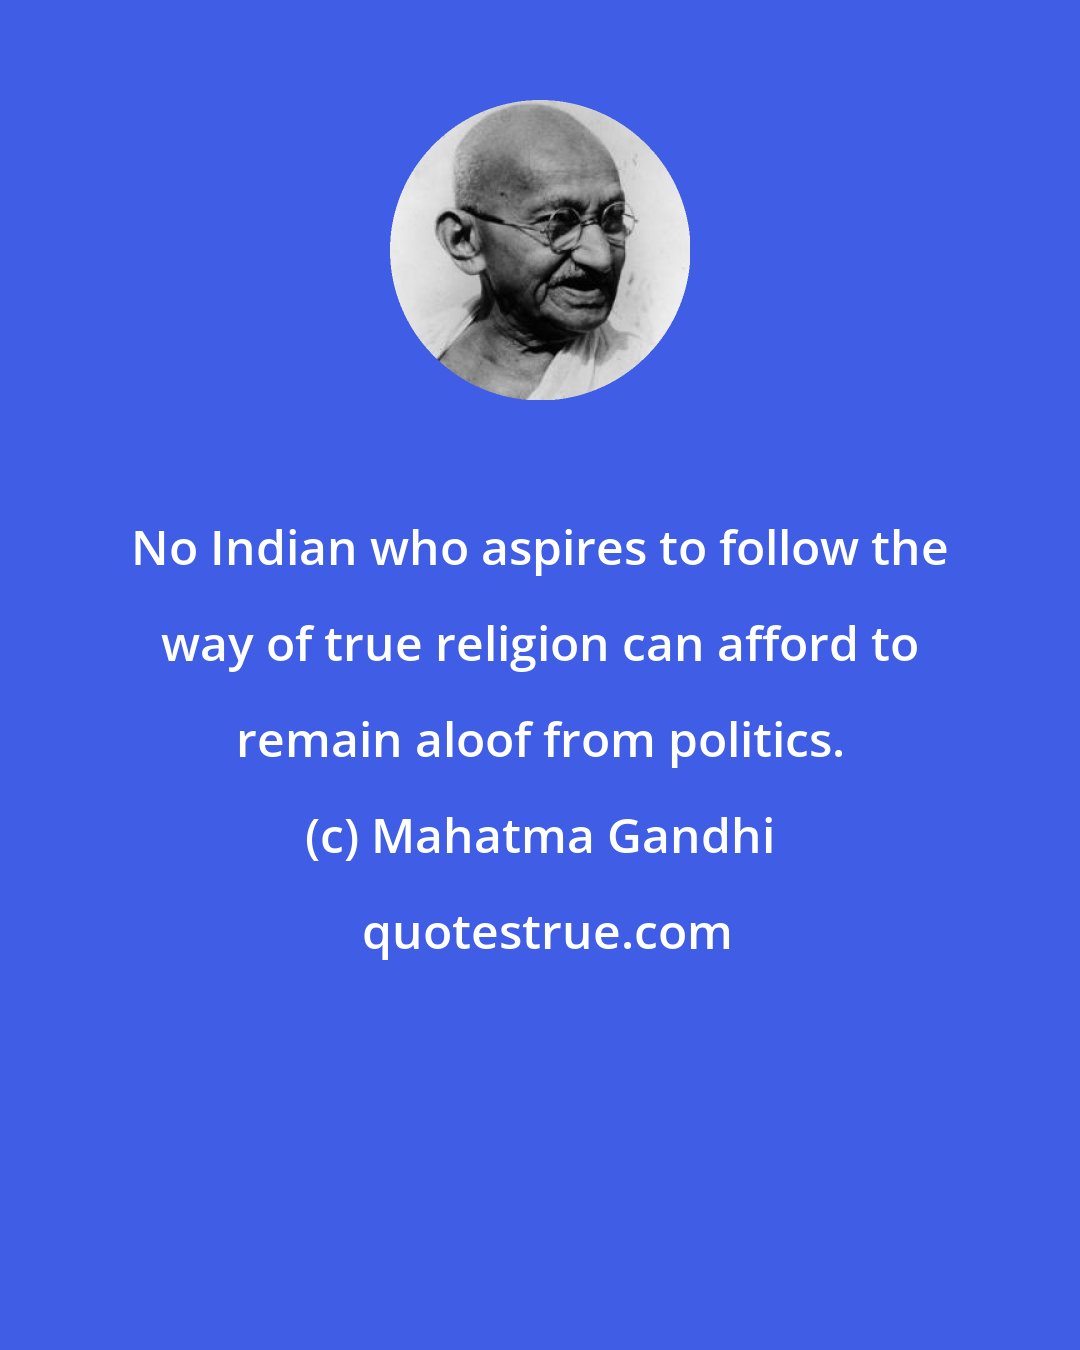 Mahatma Gandhi: No Indian who aspires to follow the way of true religion can afford to remain aloof from politics.